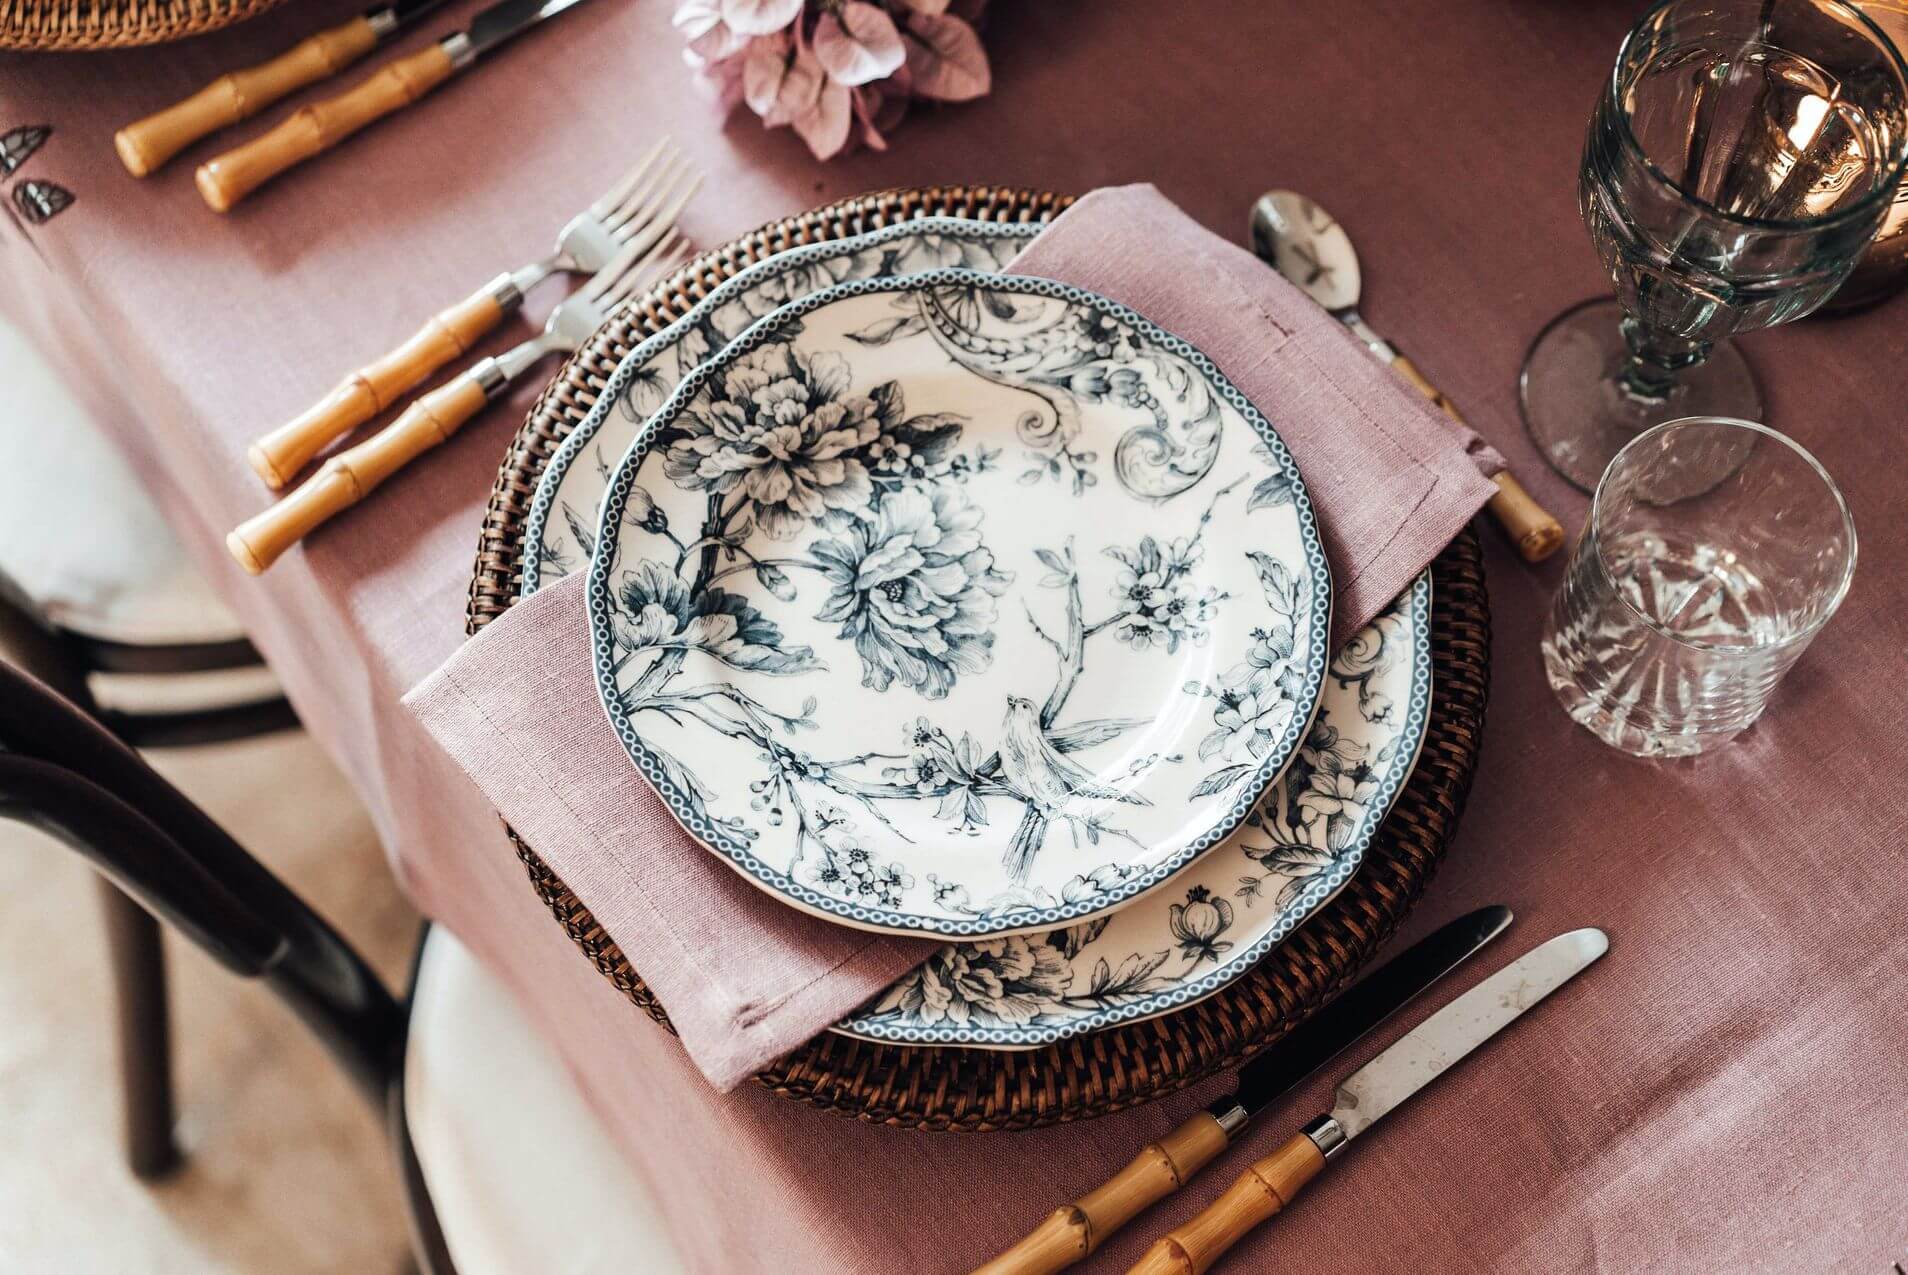 A china plate set on the table